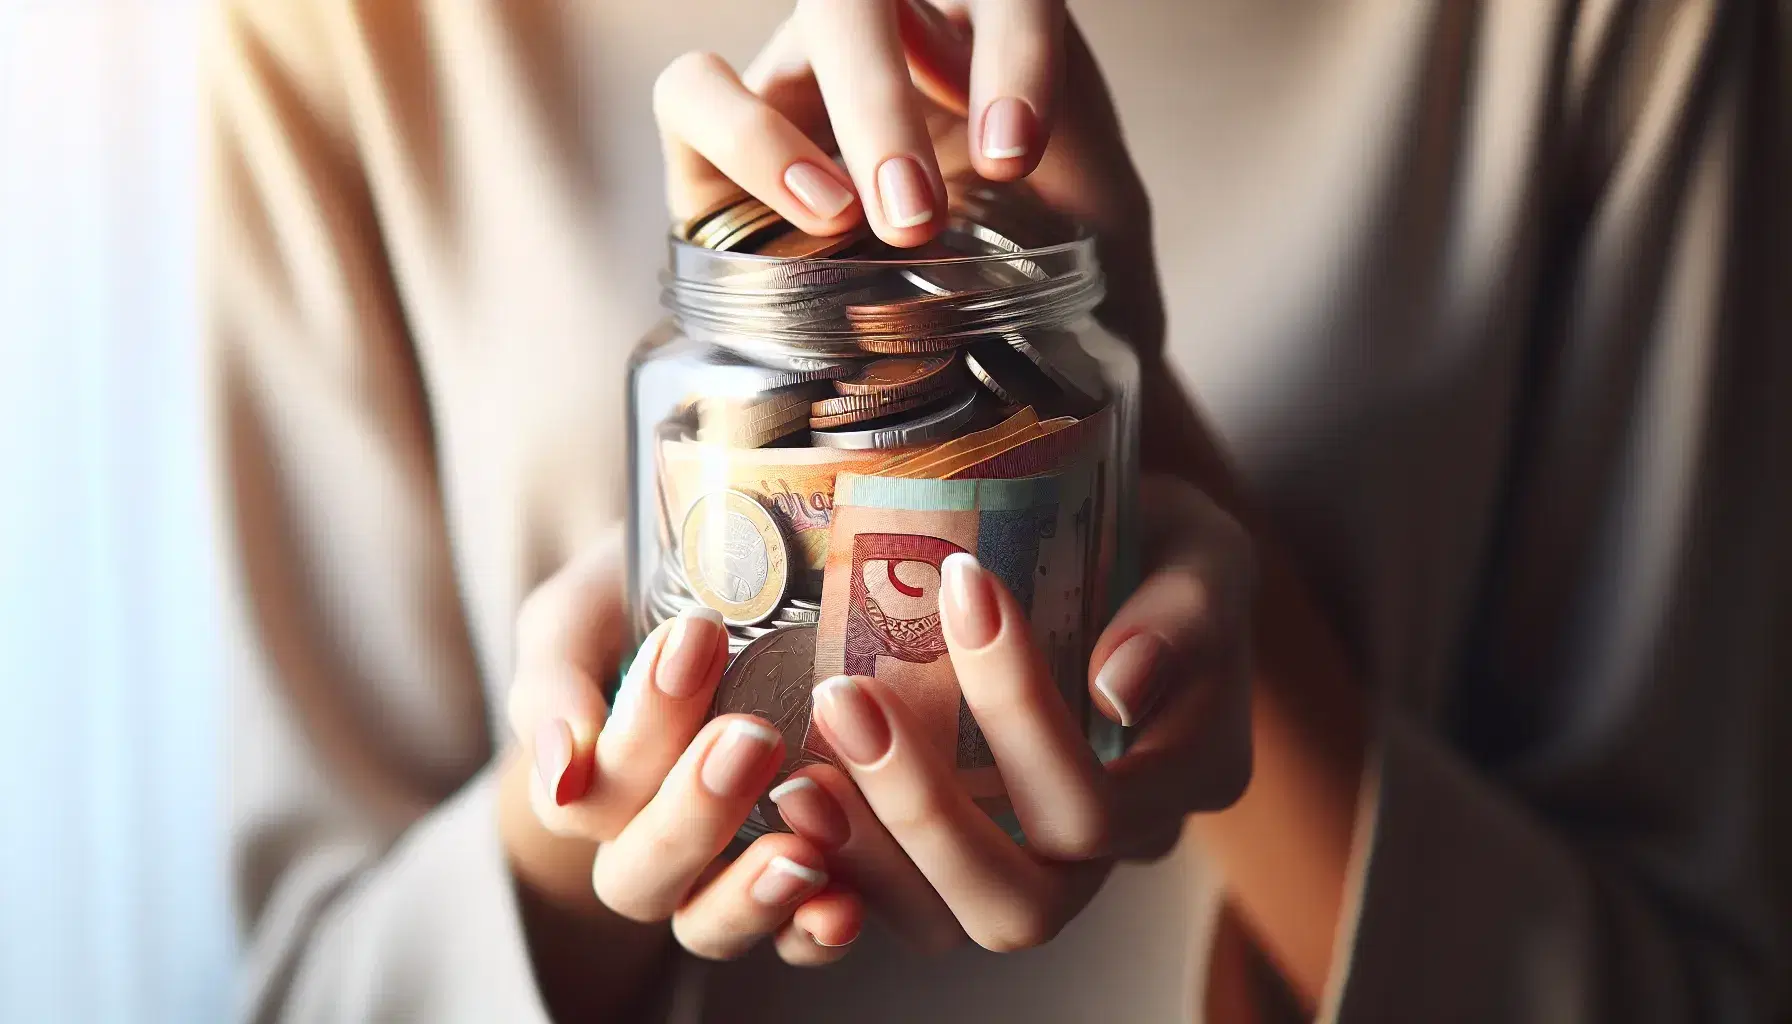 Hands cradling a glass jar filled with rolled currency notes and assorted coins, against a soft-focus neutral background, highlighting savings concept.